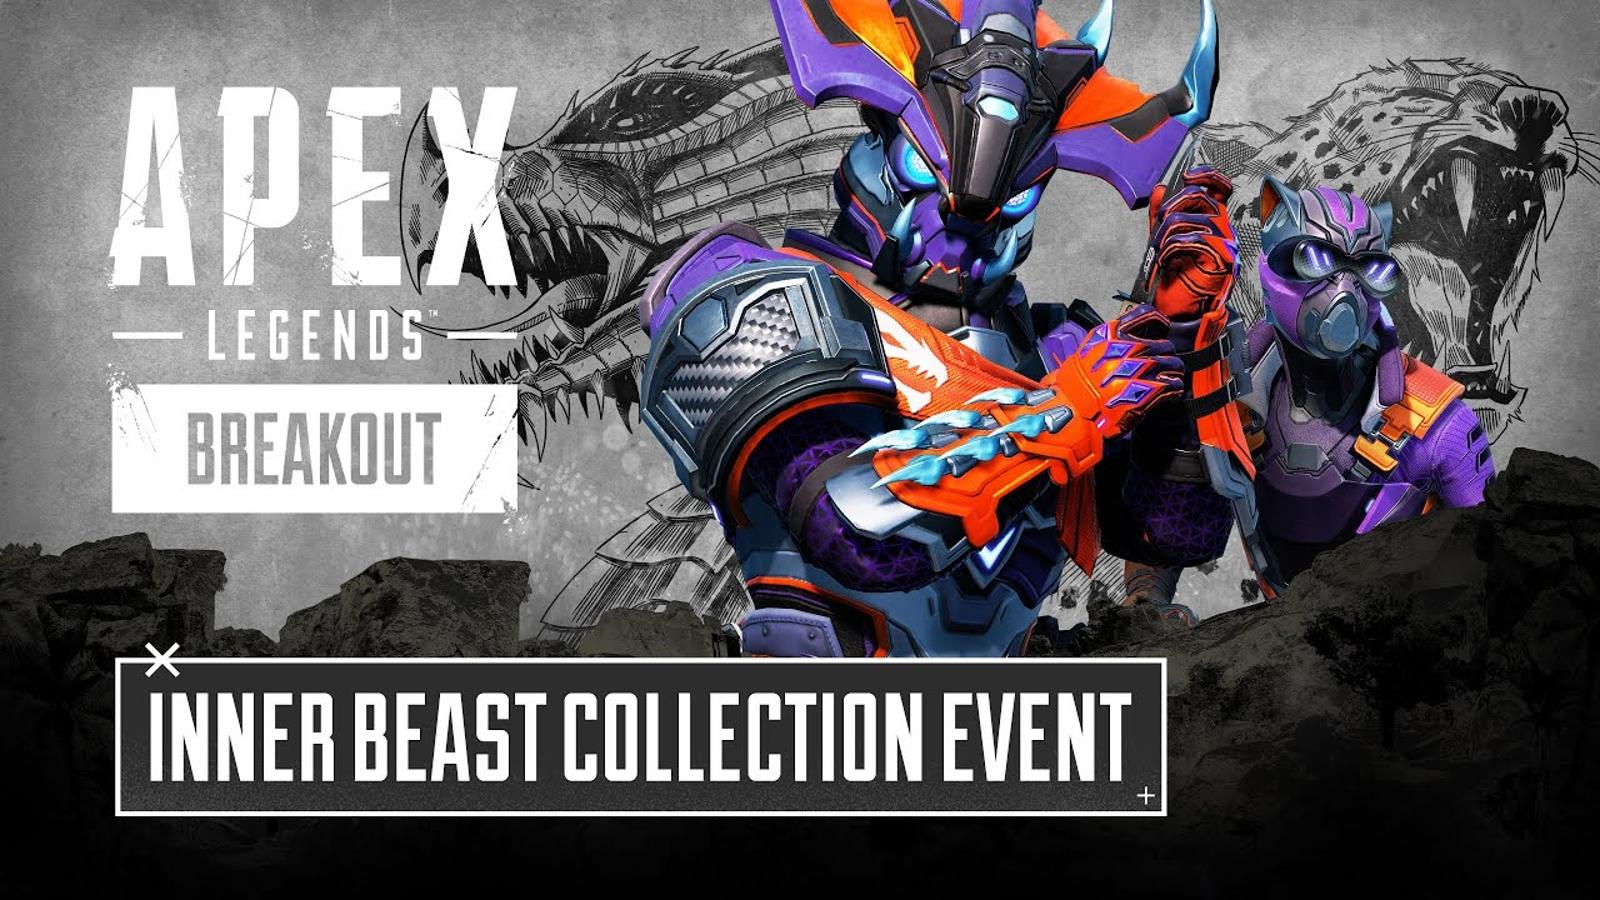 inner beast collection event